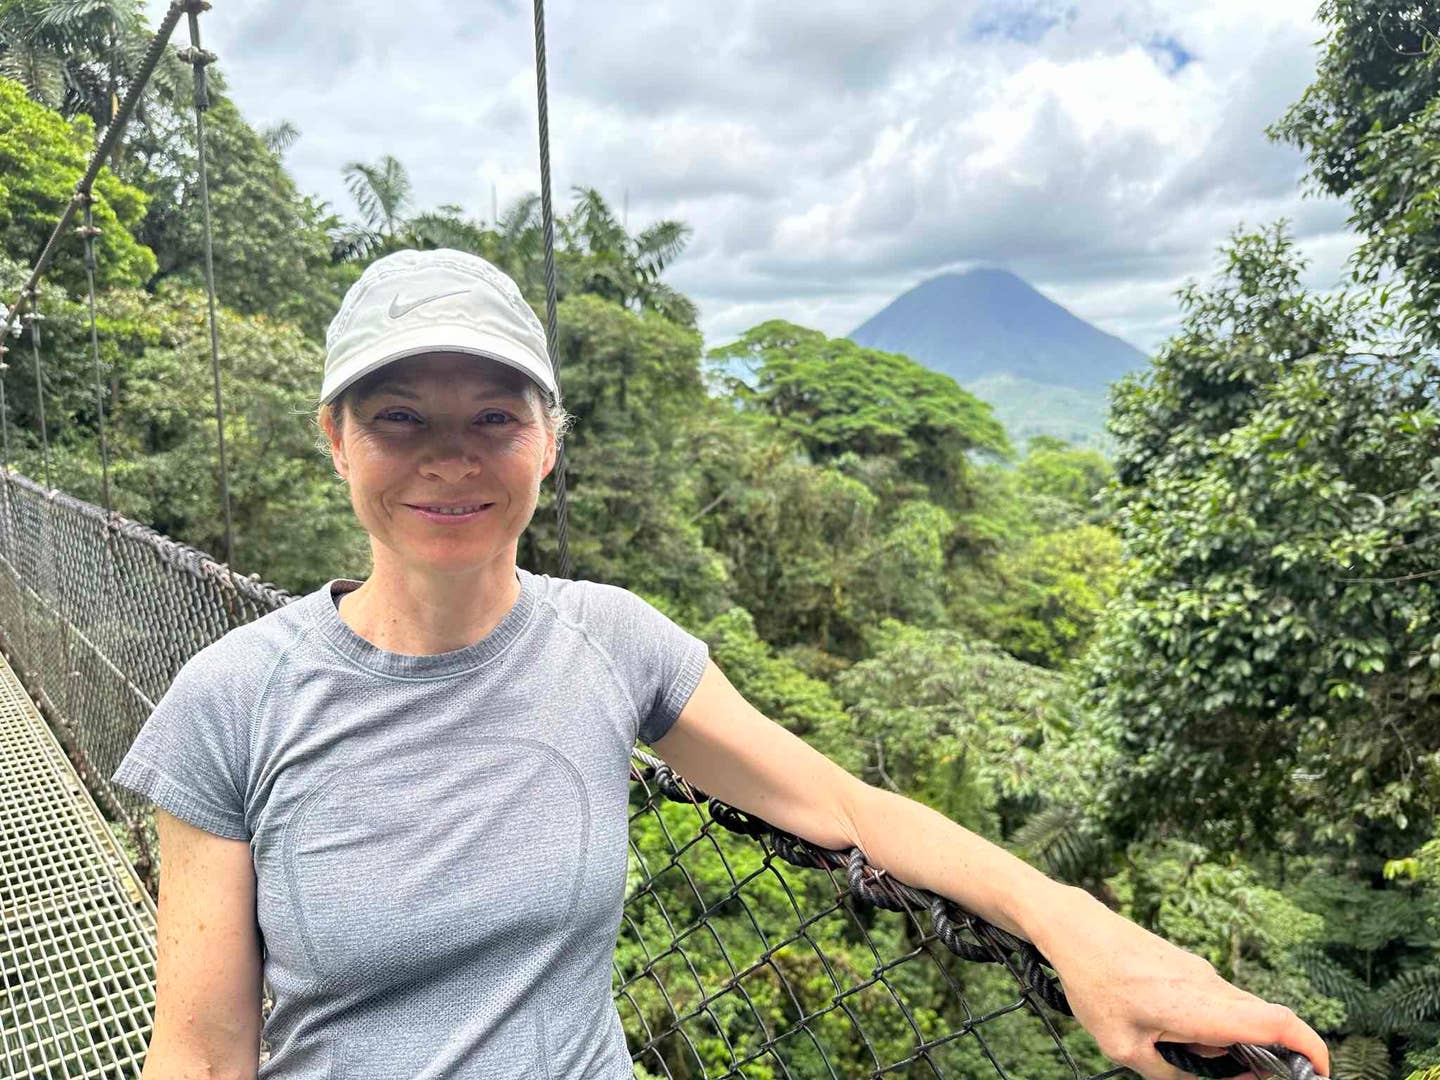 Radiation Oncologist Isabelle Vallieres stands on a bridge in a jungle looking healthy after adopting a plant-based diet for ibd